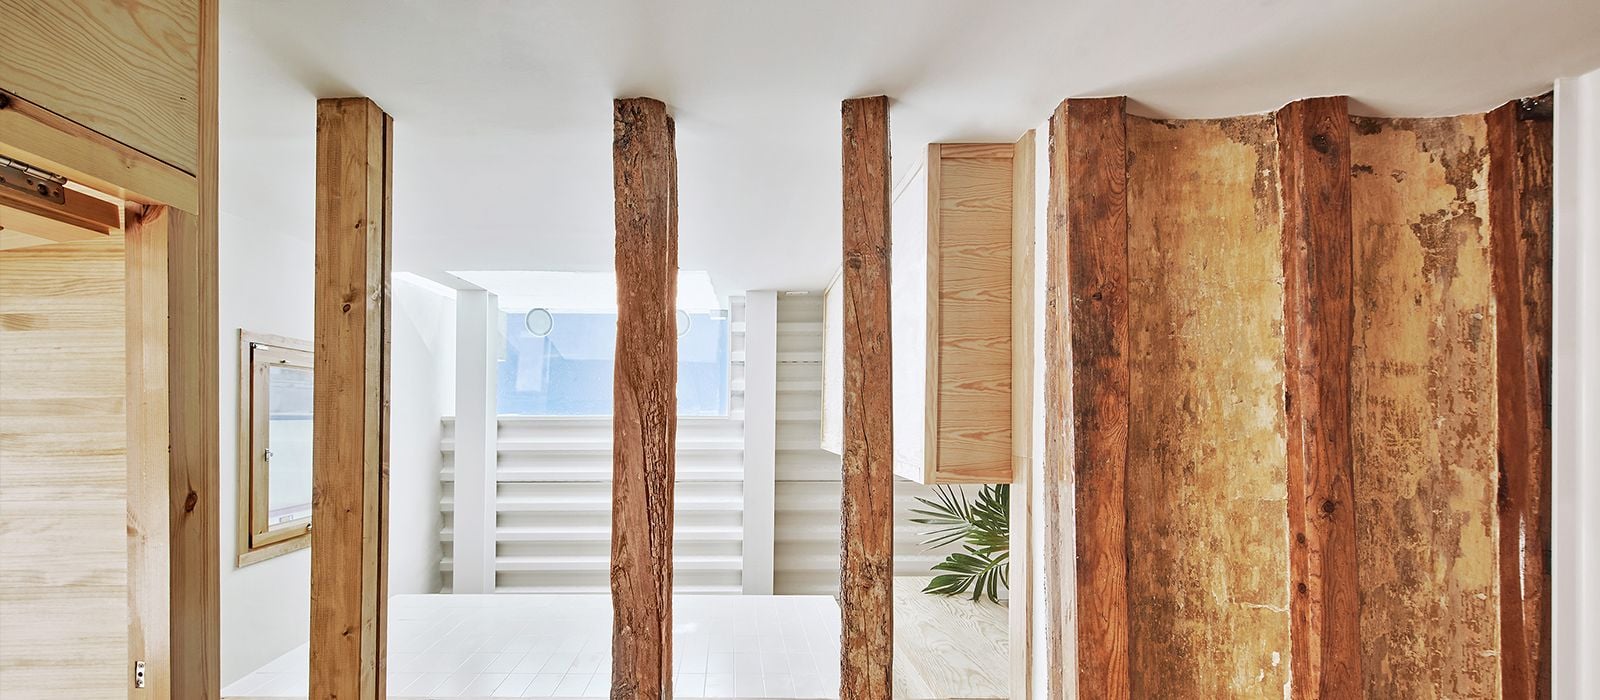 Exposed wooden beams add a rustic touch to the Twobo-restored 5x5-meter home in Barcelona. 